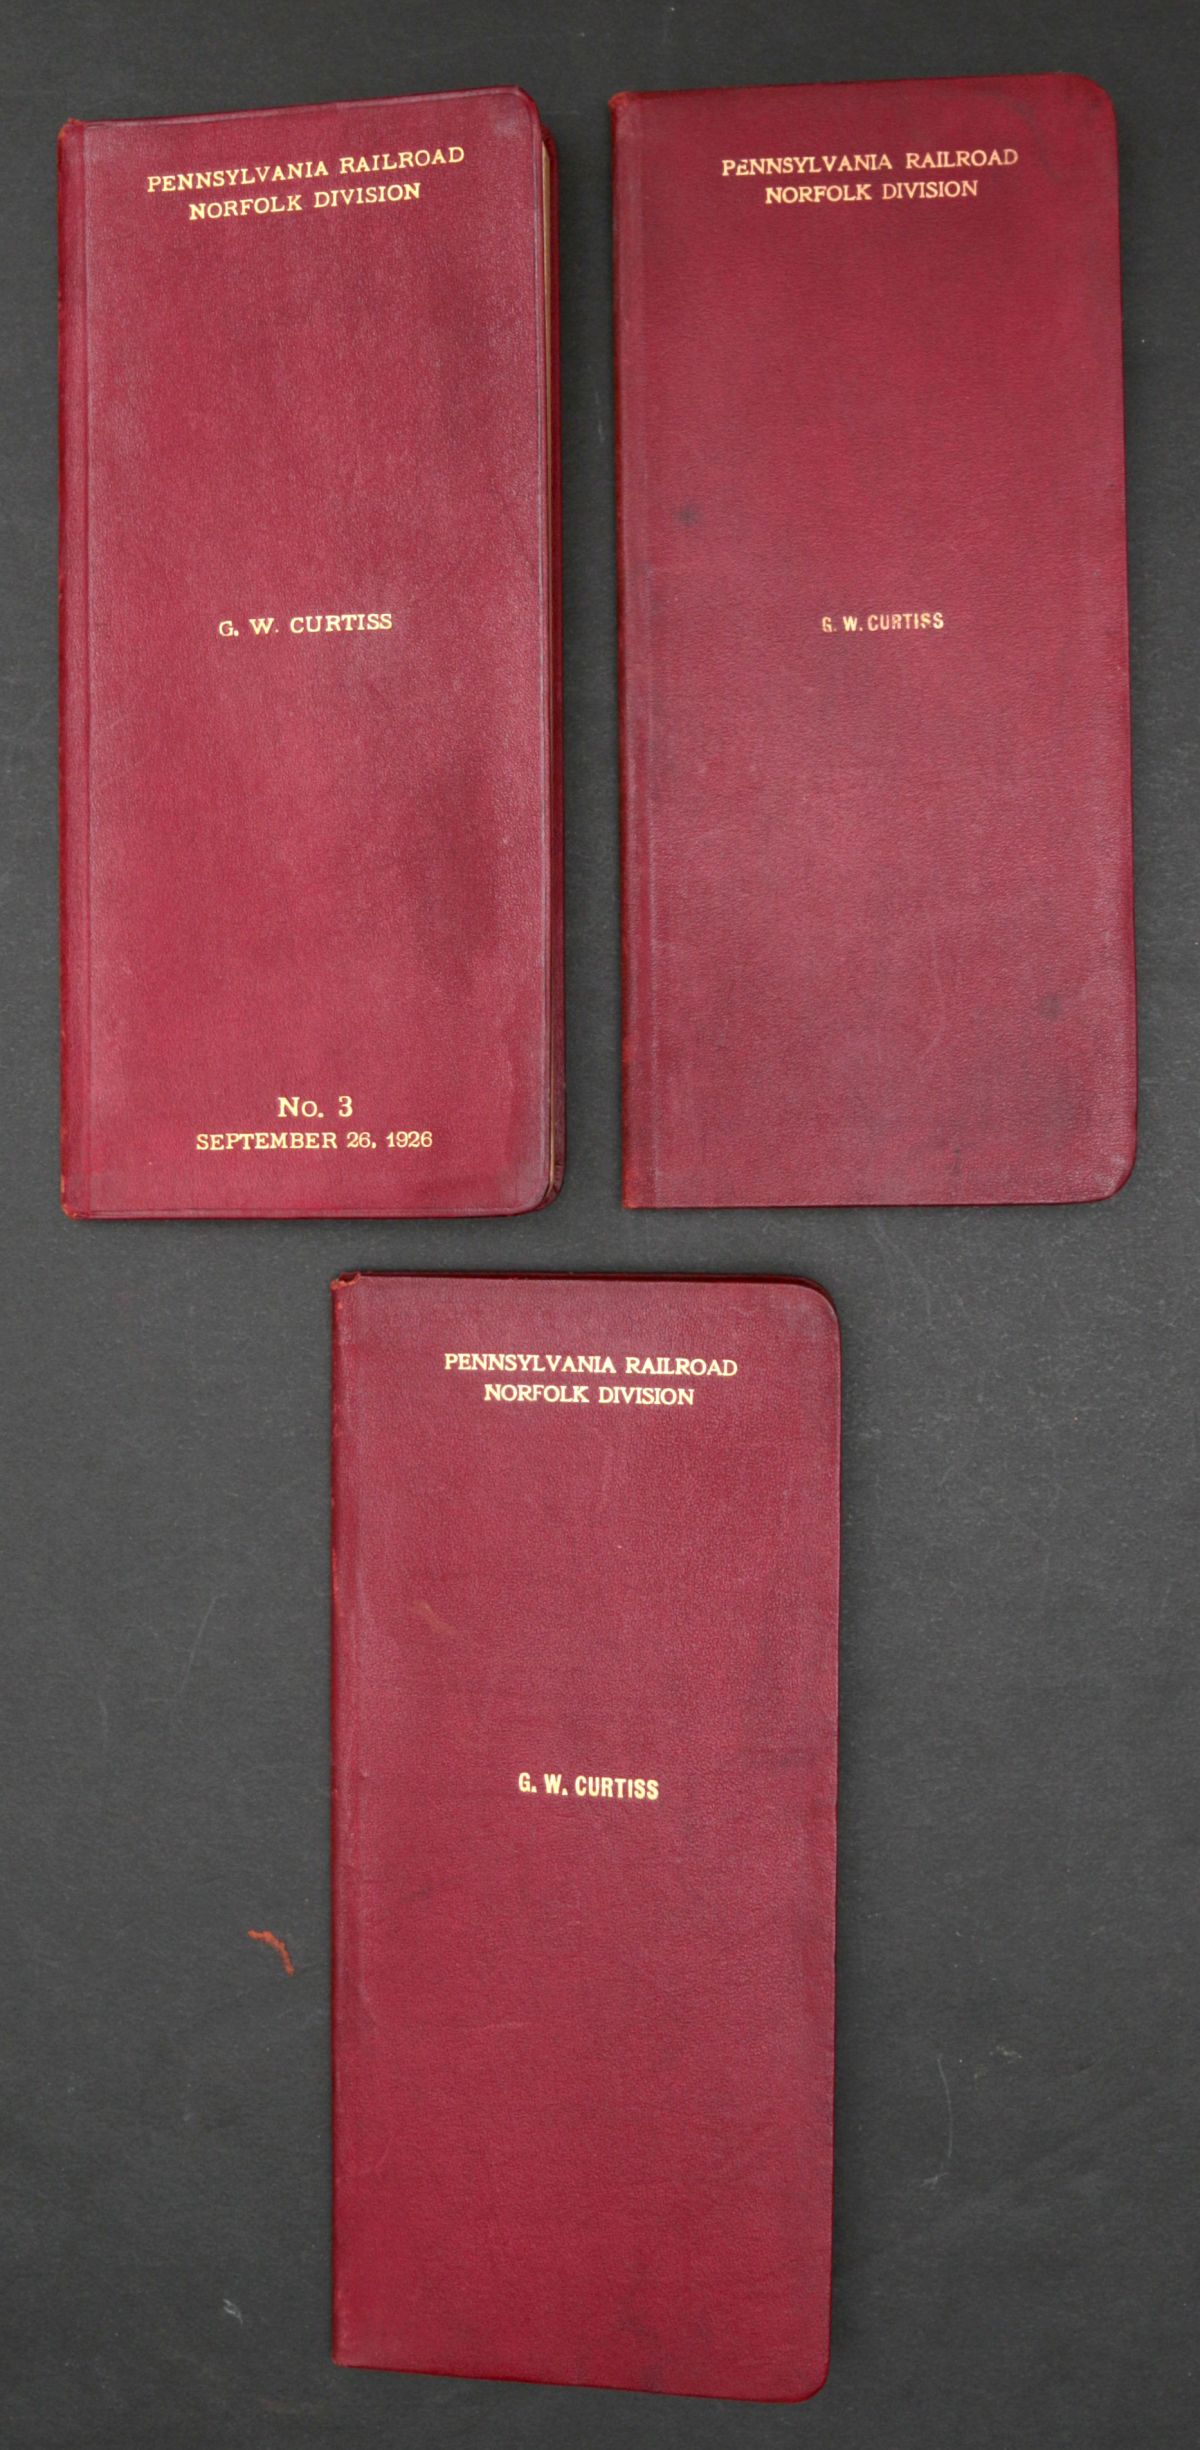 G. W. CURTIS PRR SUPERINTENDENT LEATHER TIMETABLES